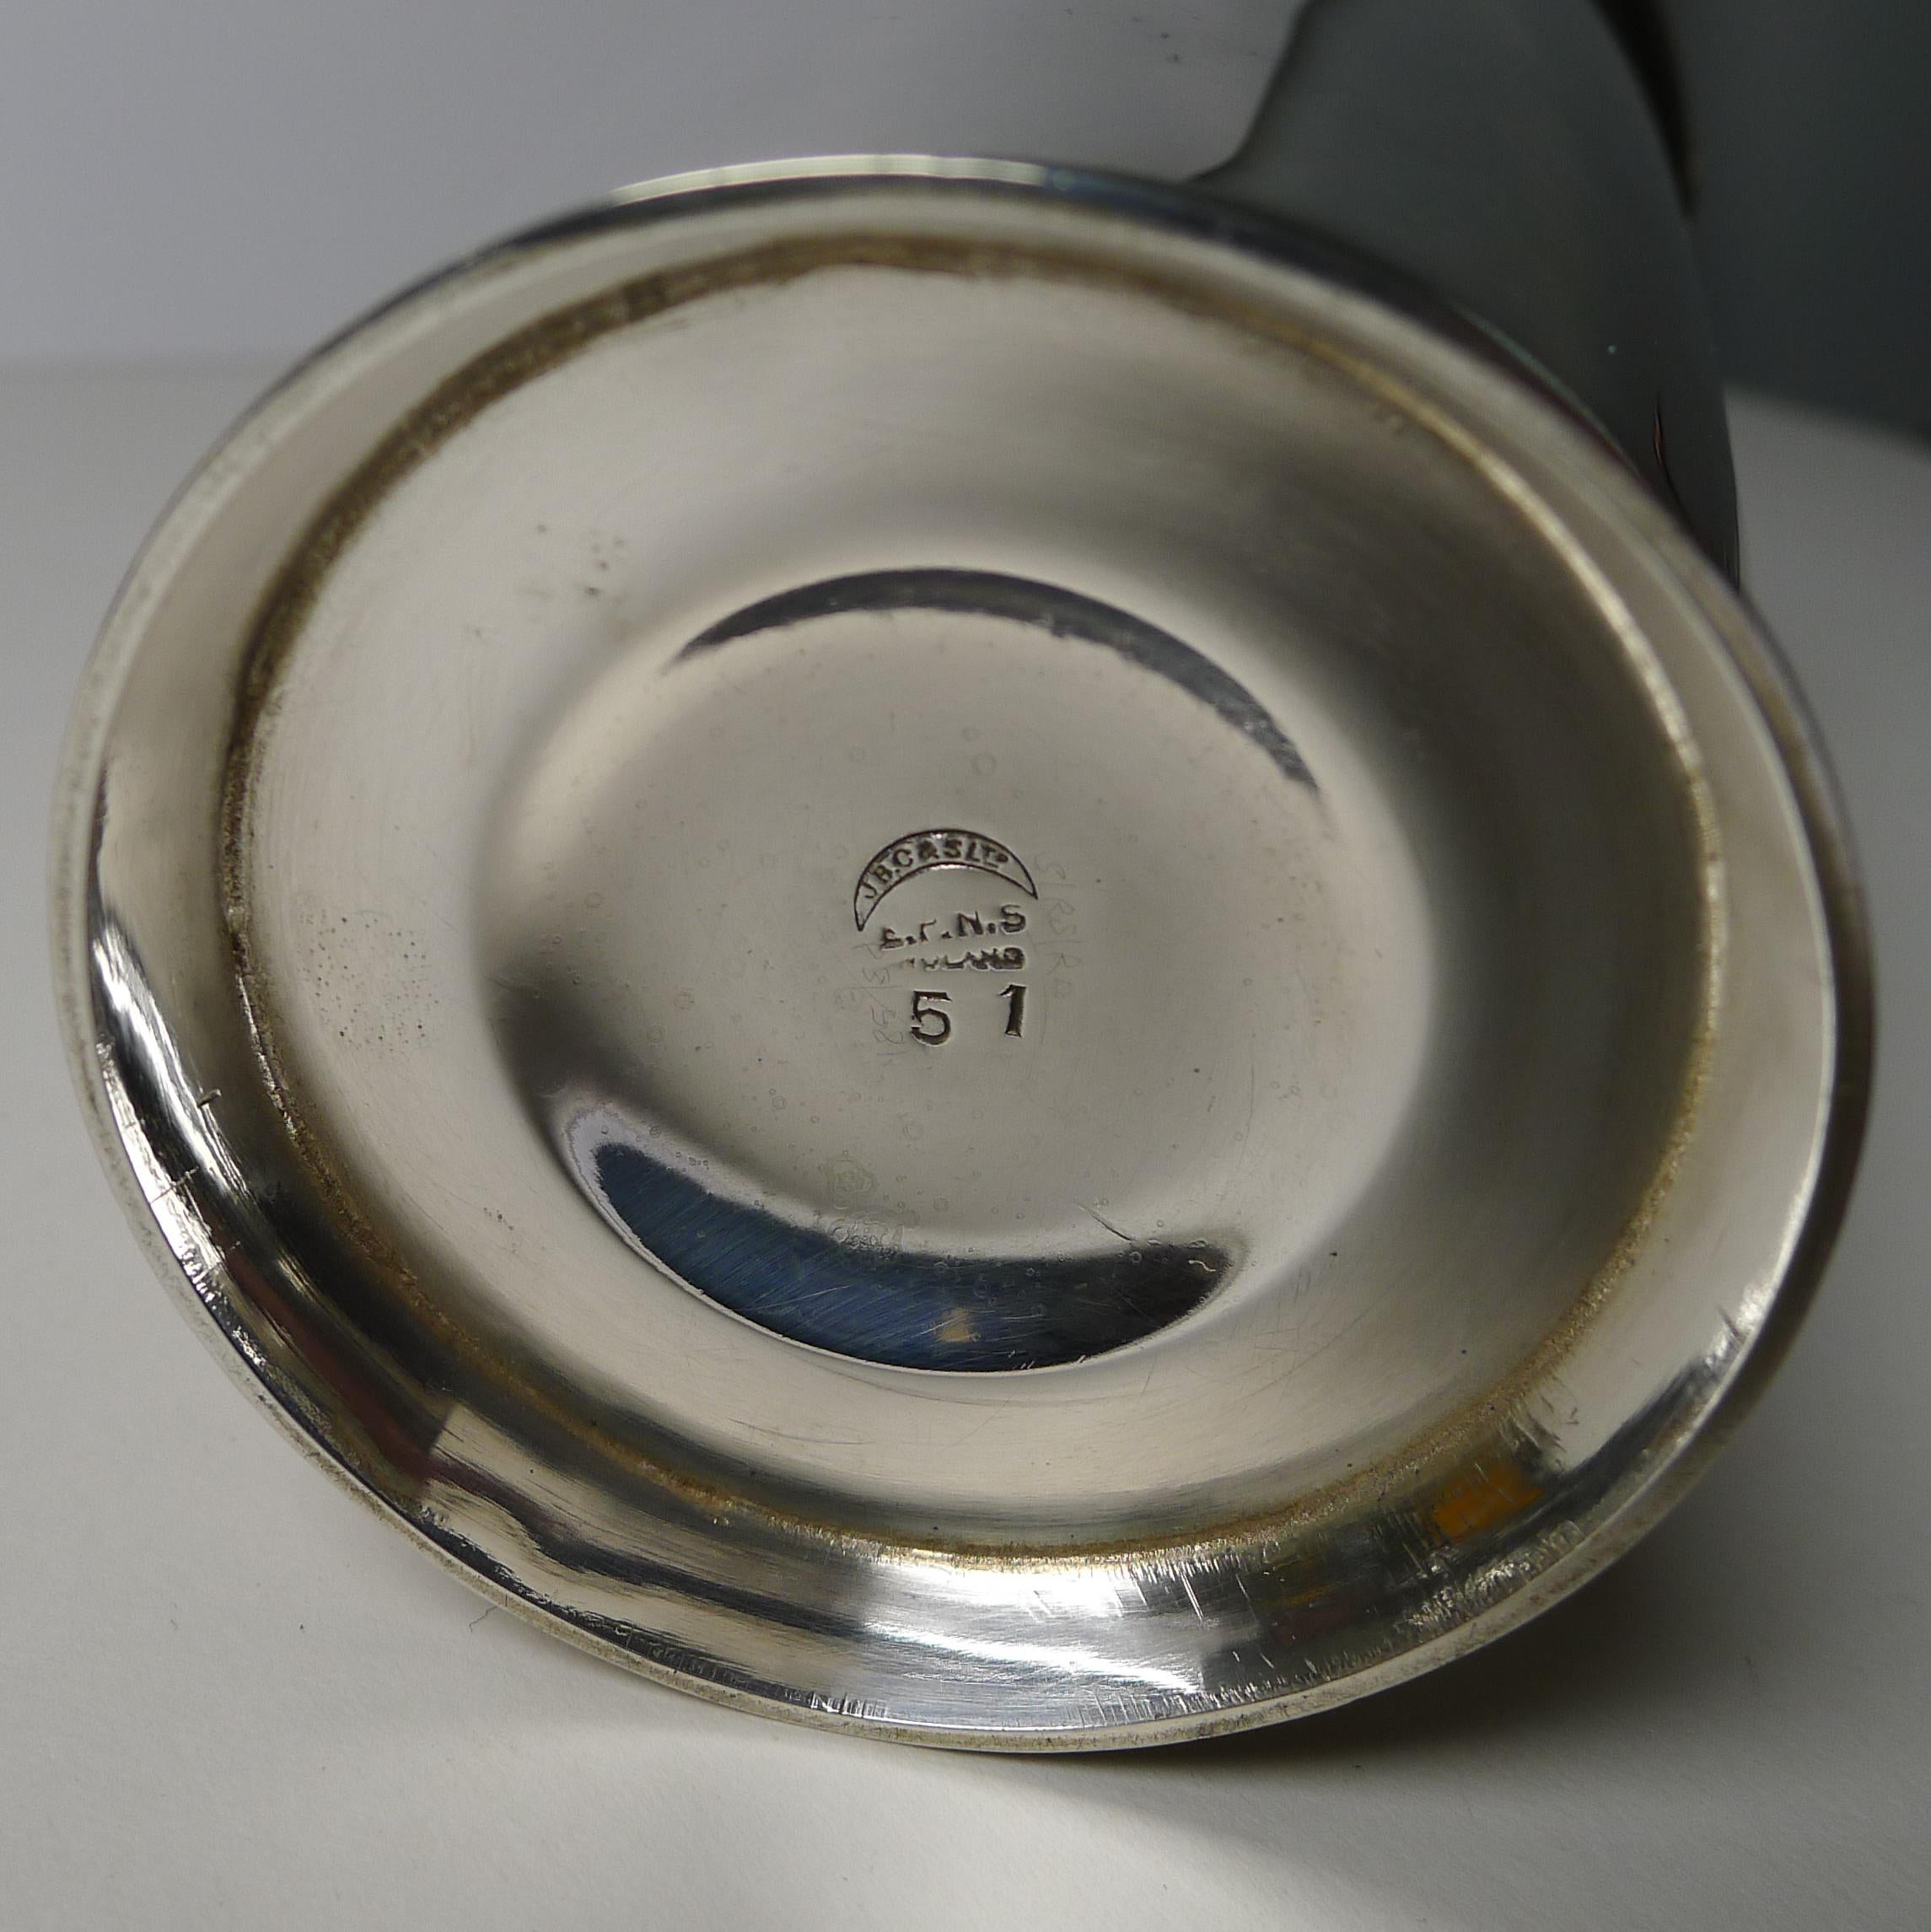 A fabulous and most unusual cocktail shaker by the well renowned silversmith, J B Chatterley & Son Ltd, fully marked on the underside; also marked EPNS for Electro-Plated Nickel Silver and 